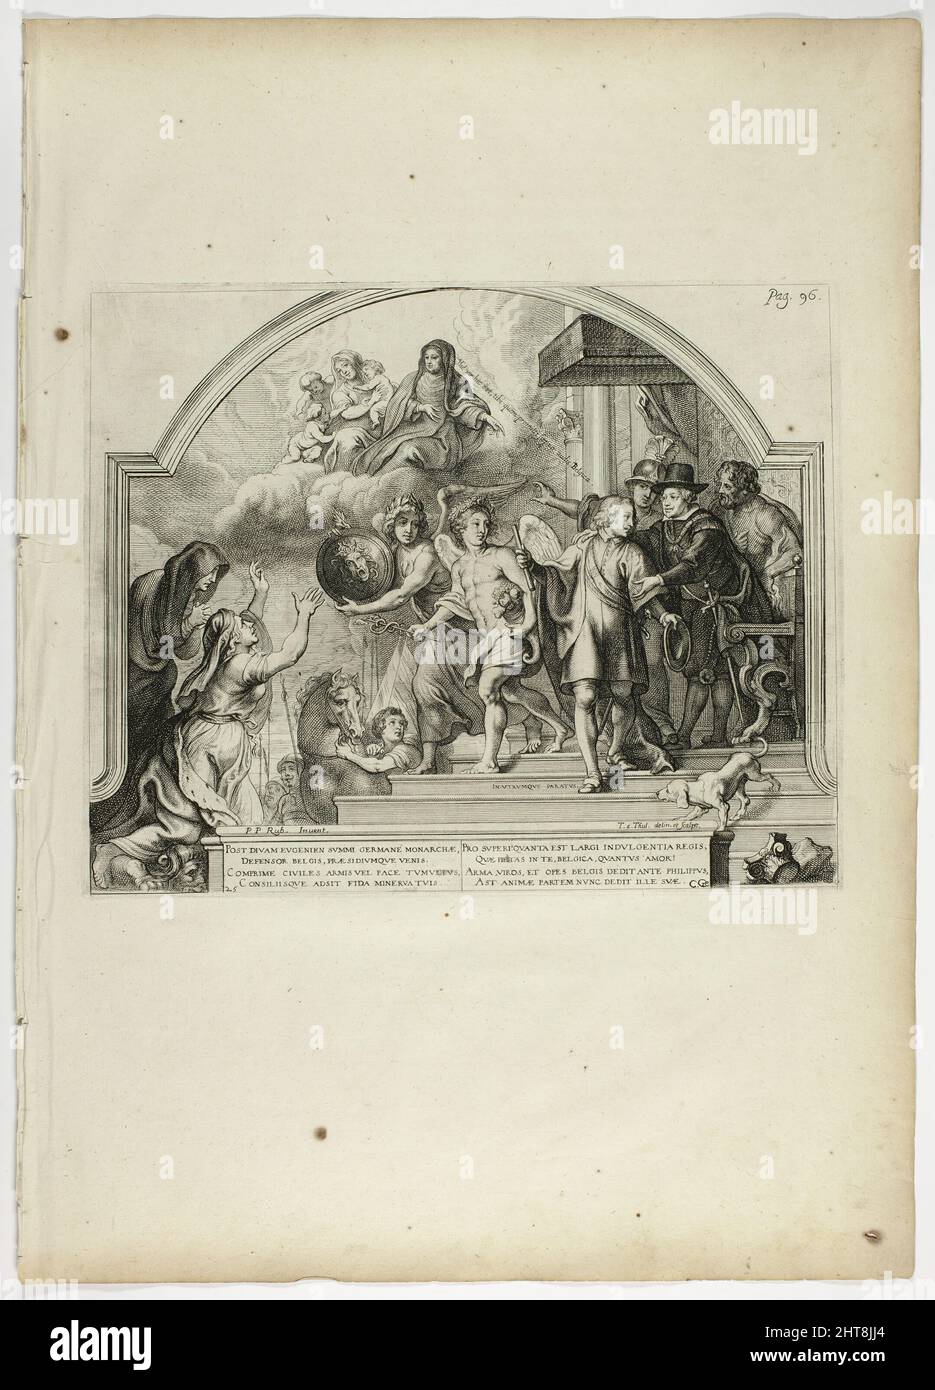 Philip IV Appointing Prince Ferdinand Governor of the Netherlands, plate 25 from Casperius Gevartius, Pompa Introitus Honori Serenissimi Principis Ferdinandi (Triumphal Entry of the Most Serene and Honorable Cardinal-Infante Ferdinand), 1642. Stock Photo